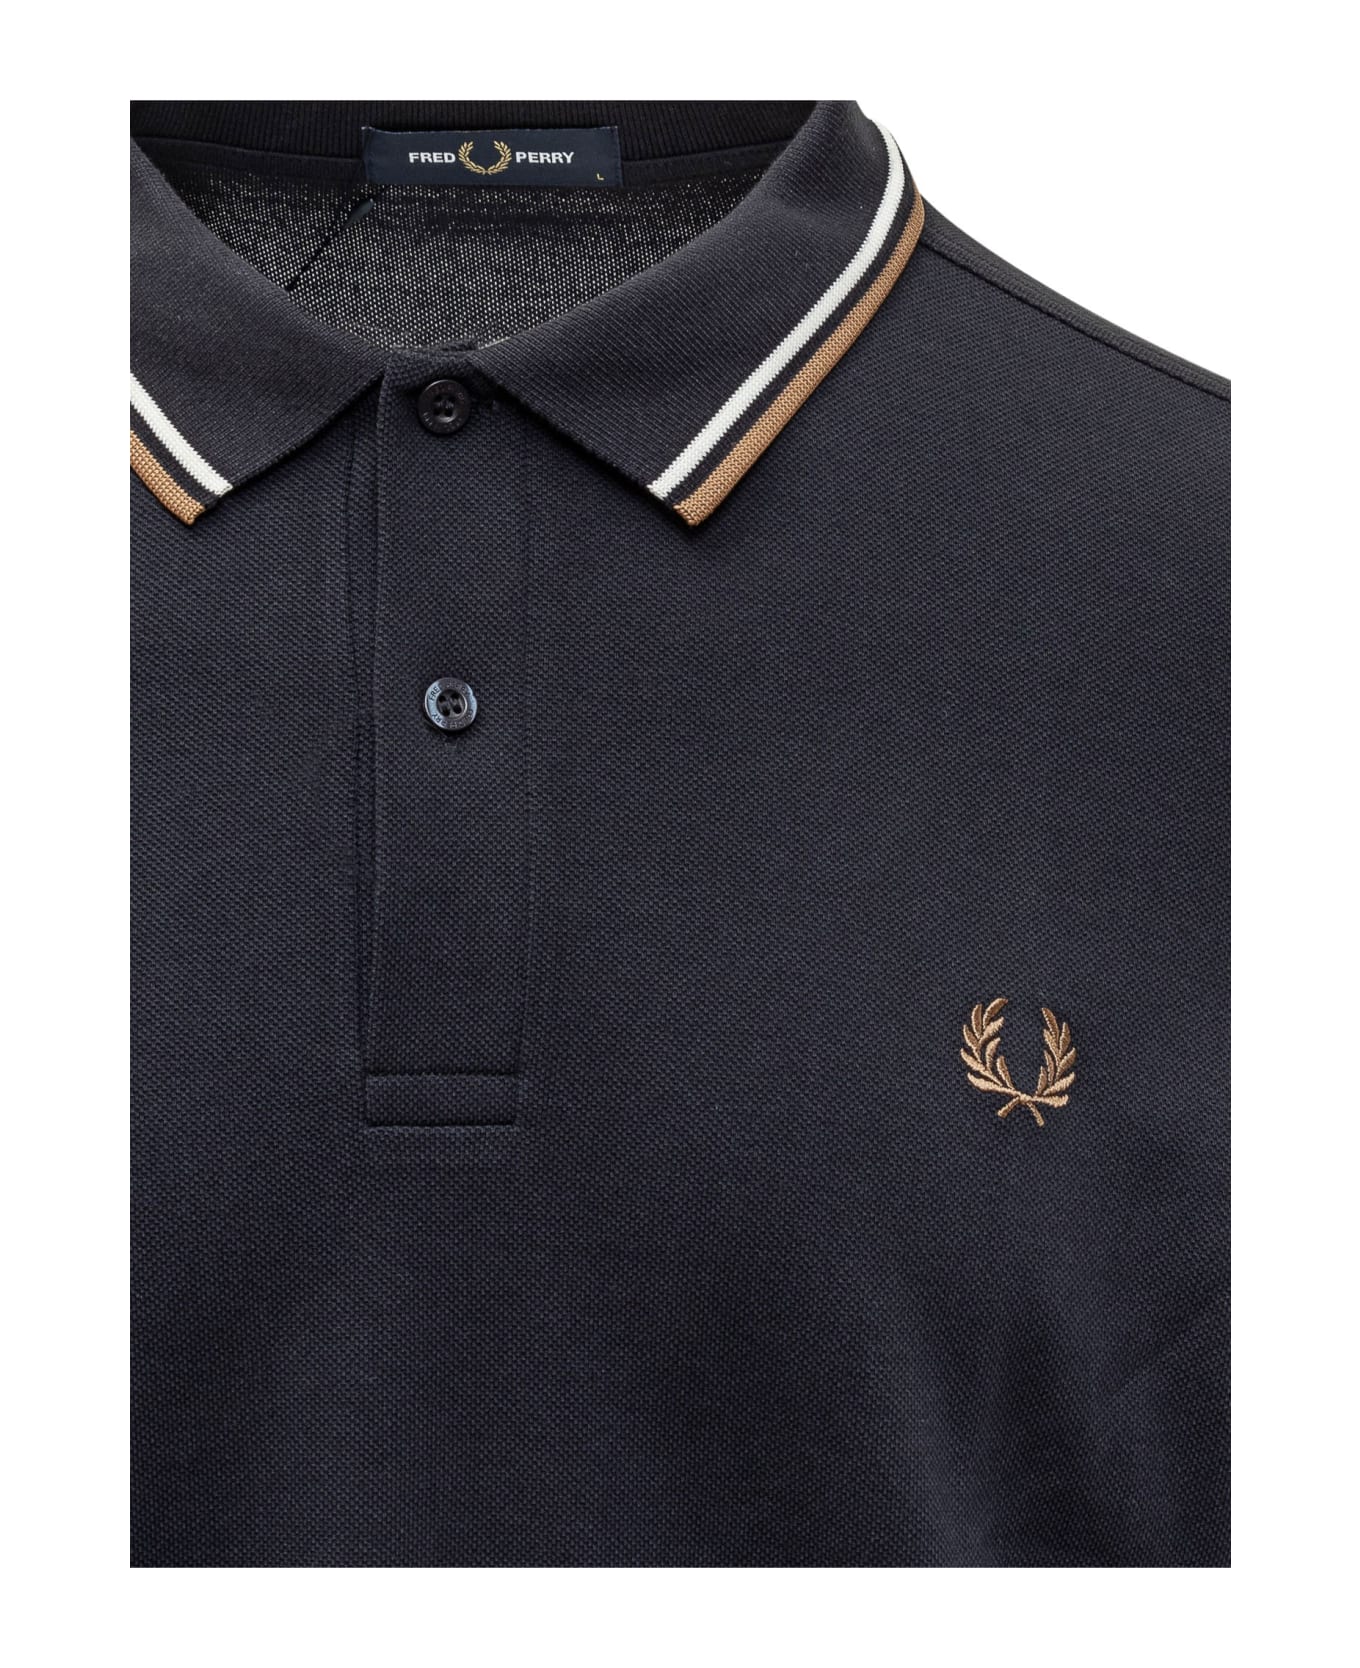 Fred Perry Polo Long Sleeves - NAVY/SNOWH/SHSTO